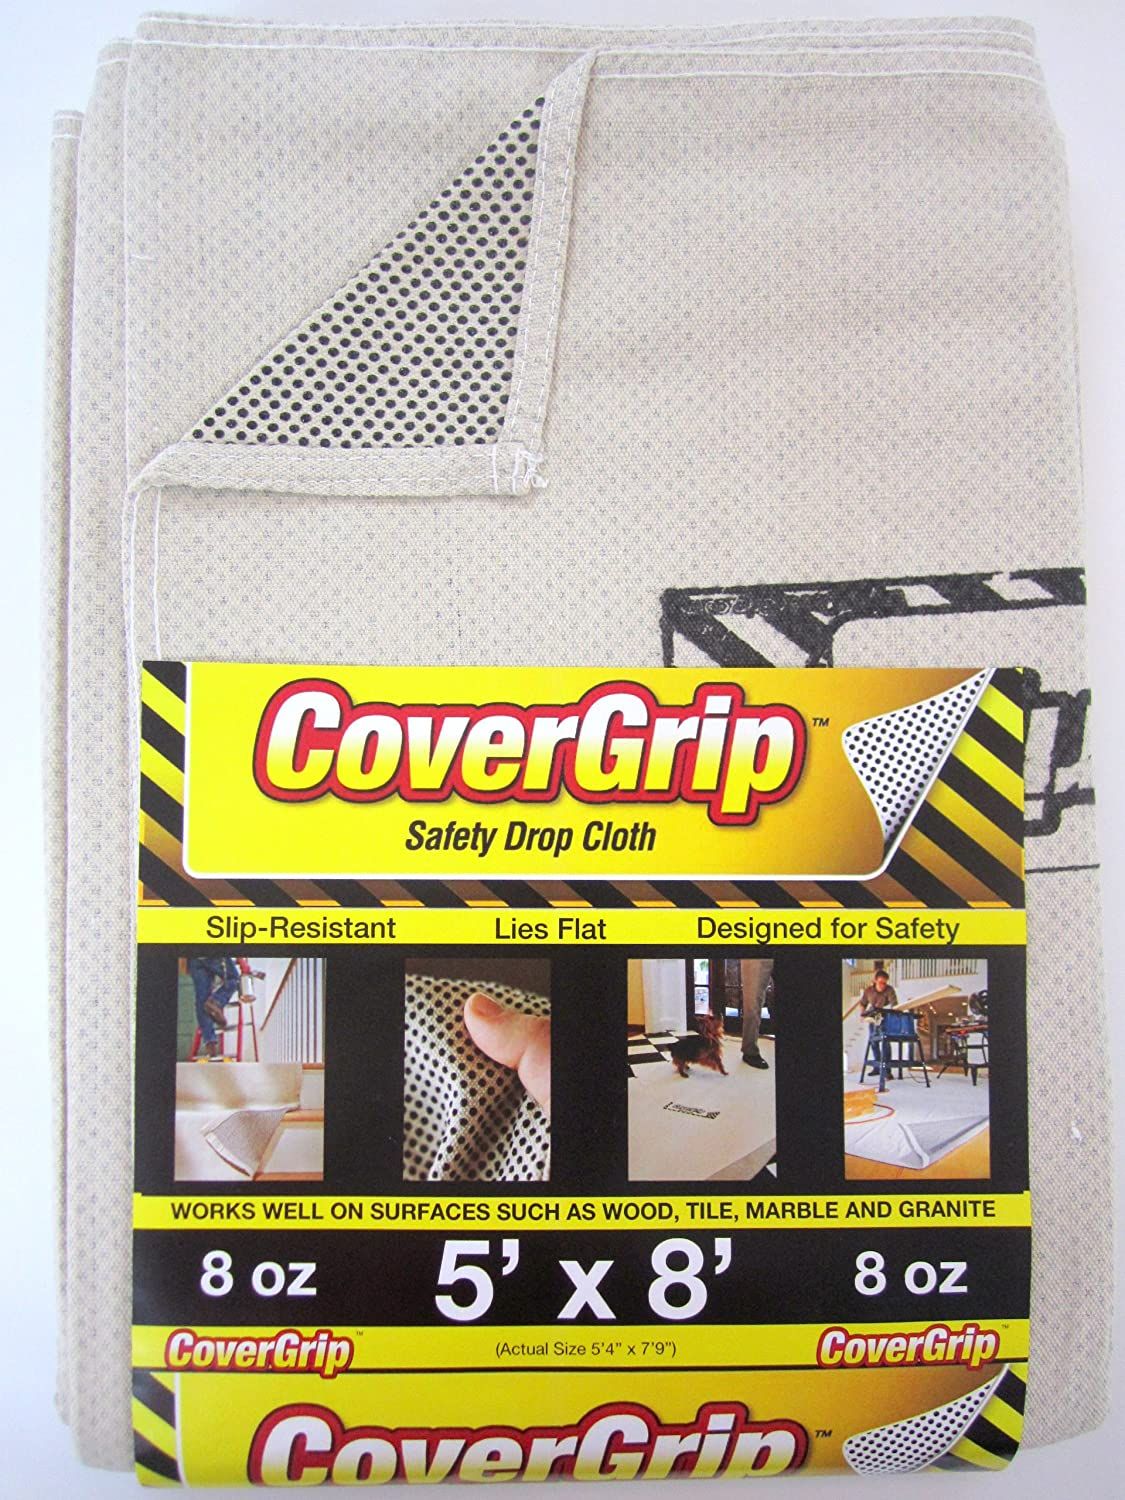 CoverGrip Canvas Safety Drop Cloth